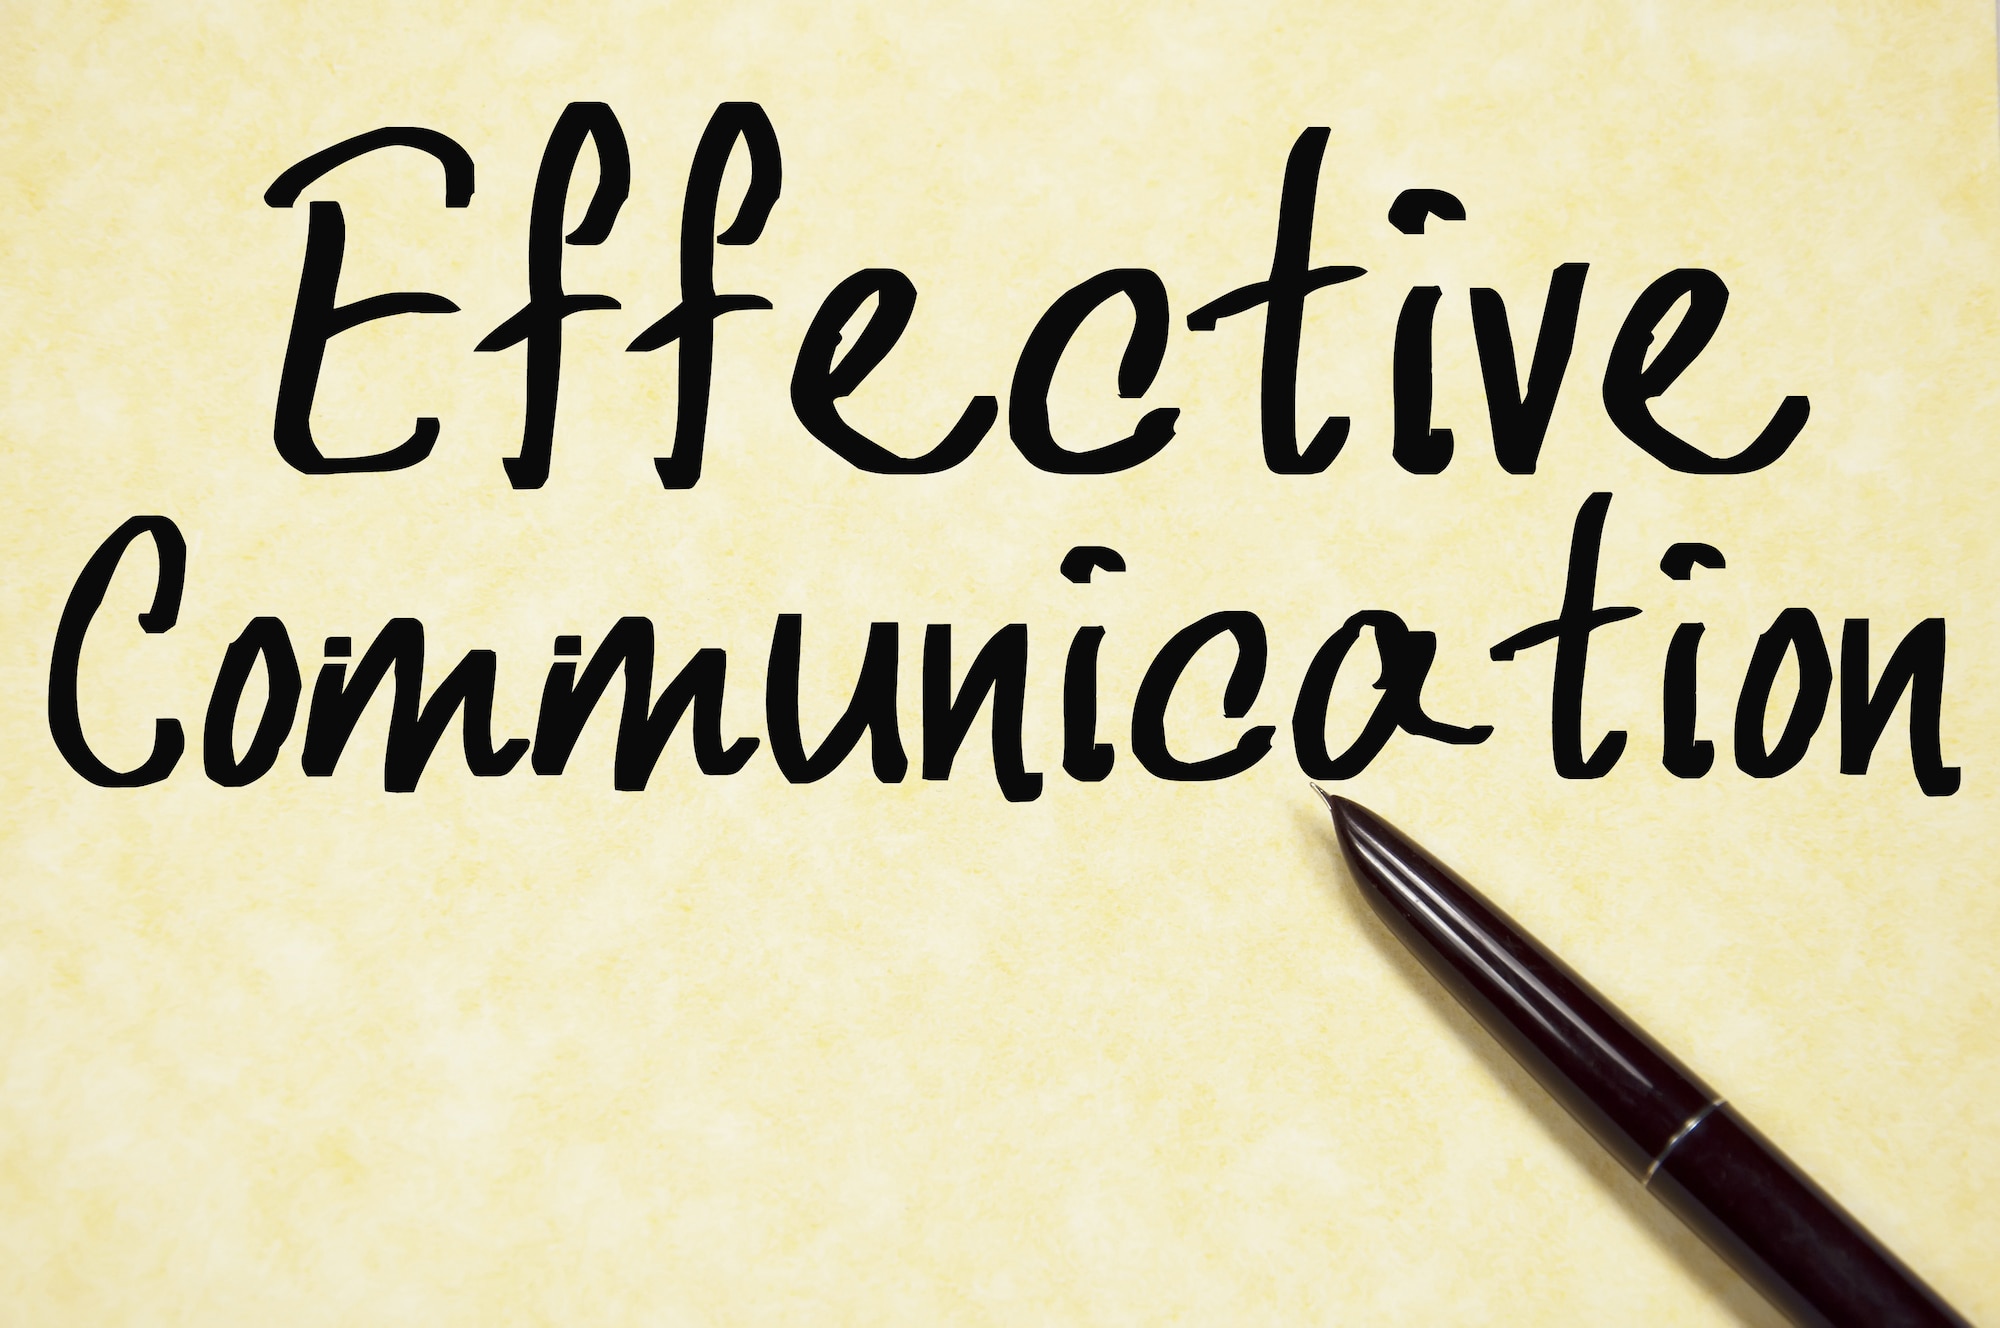 Graphic says Effective Communication to support commentary on effective communication.